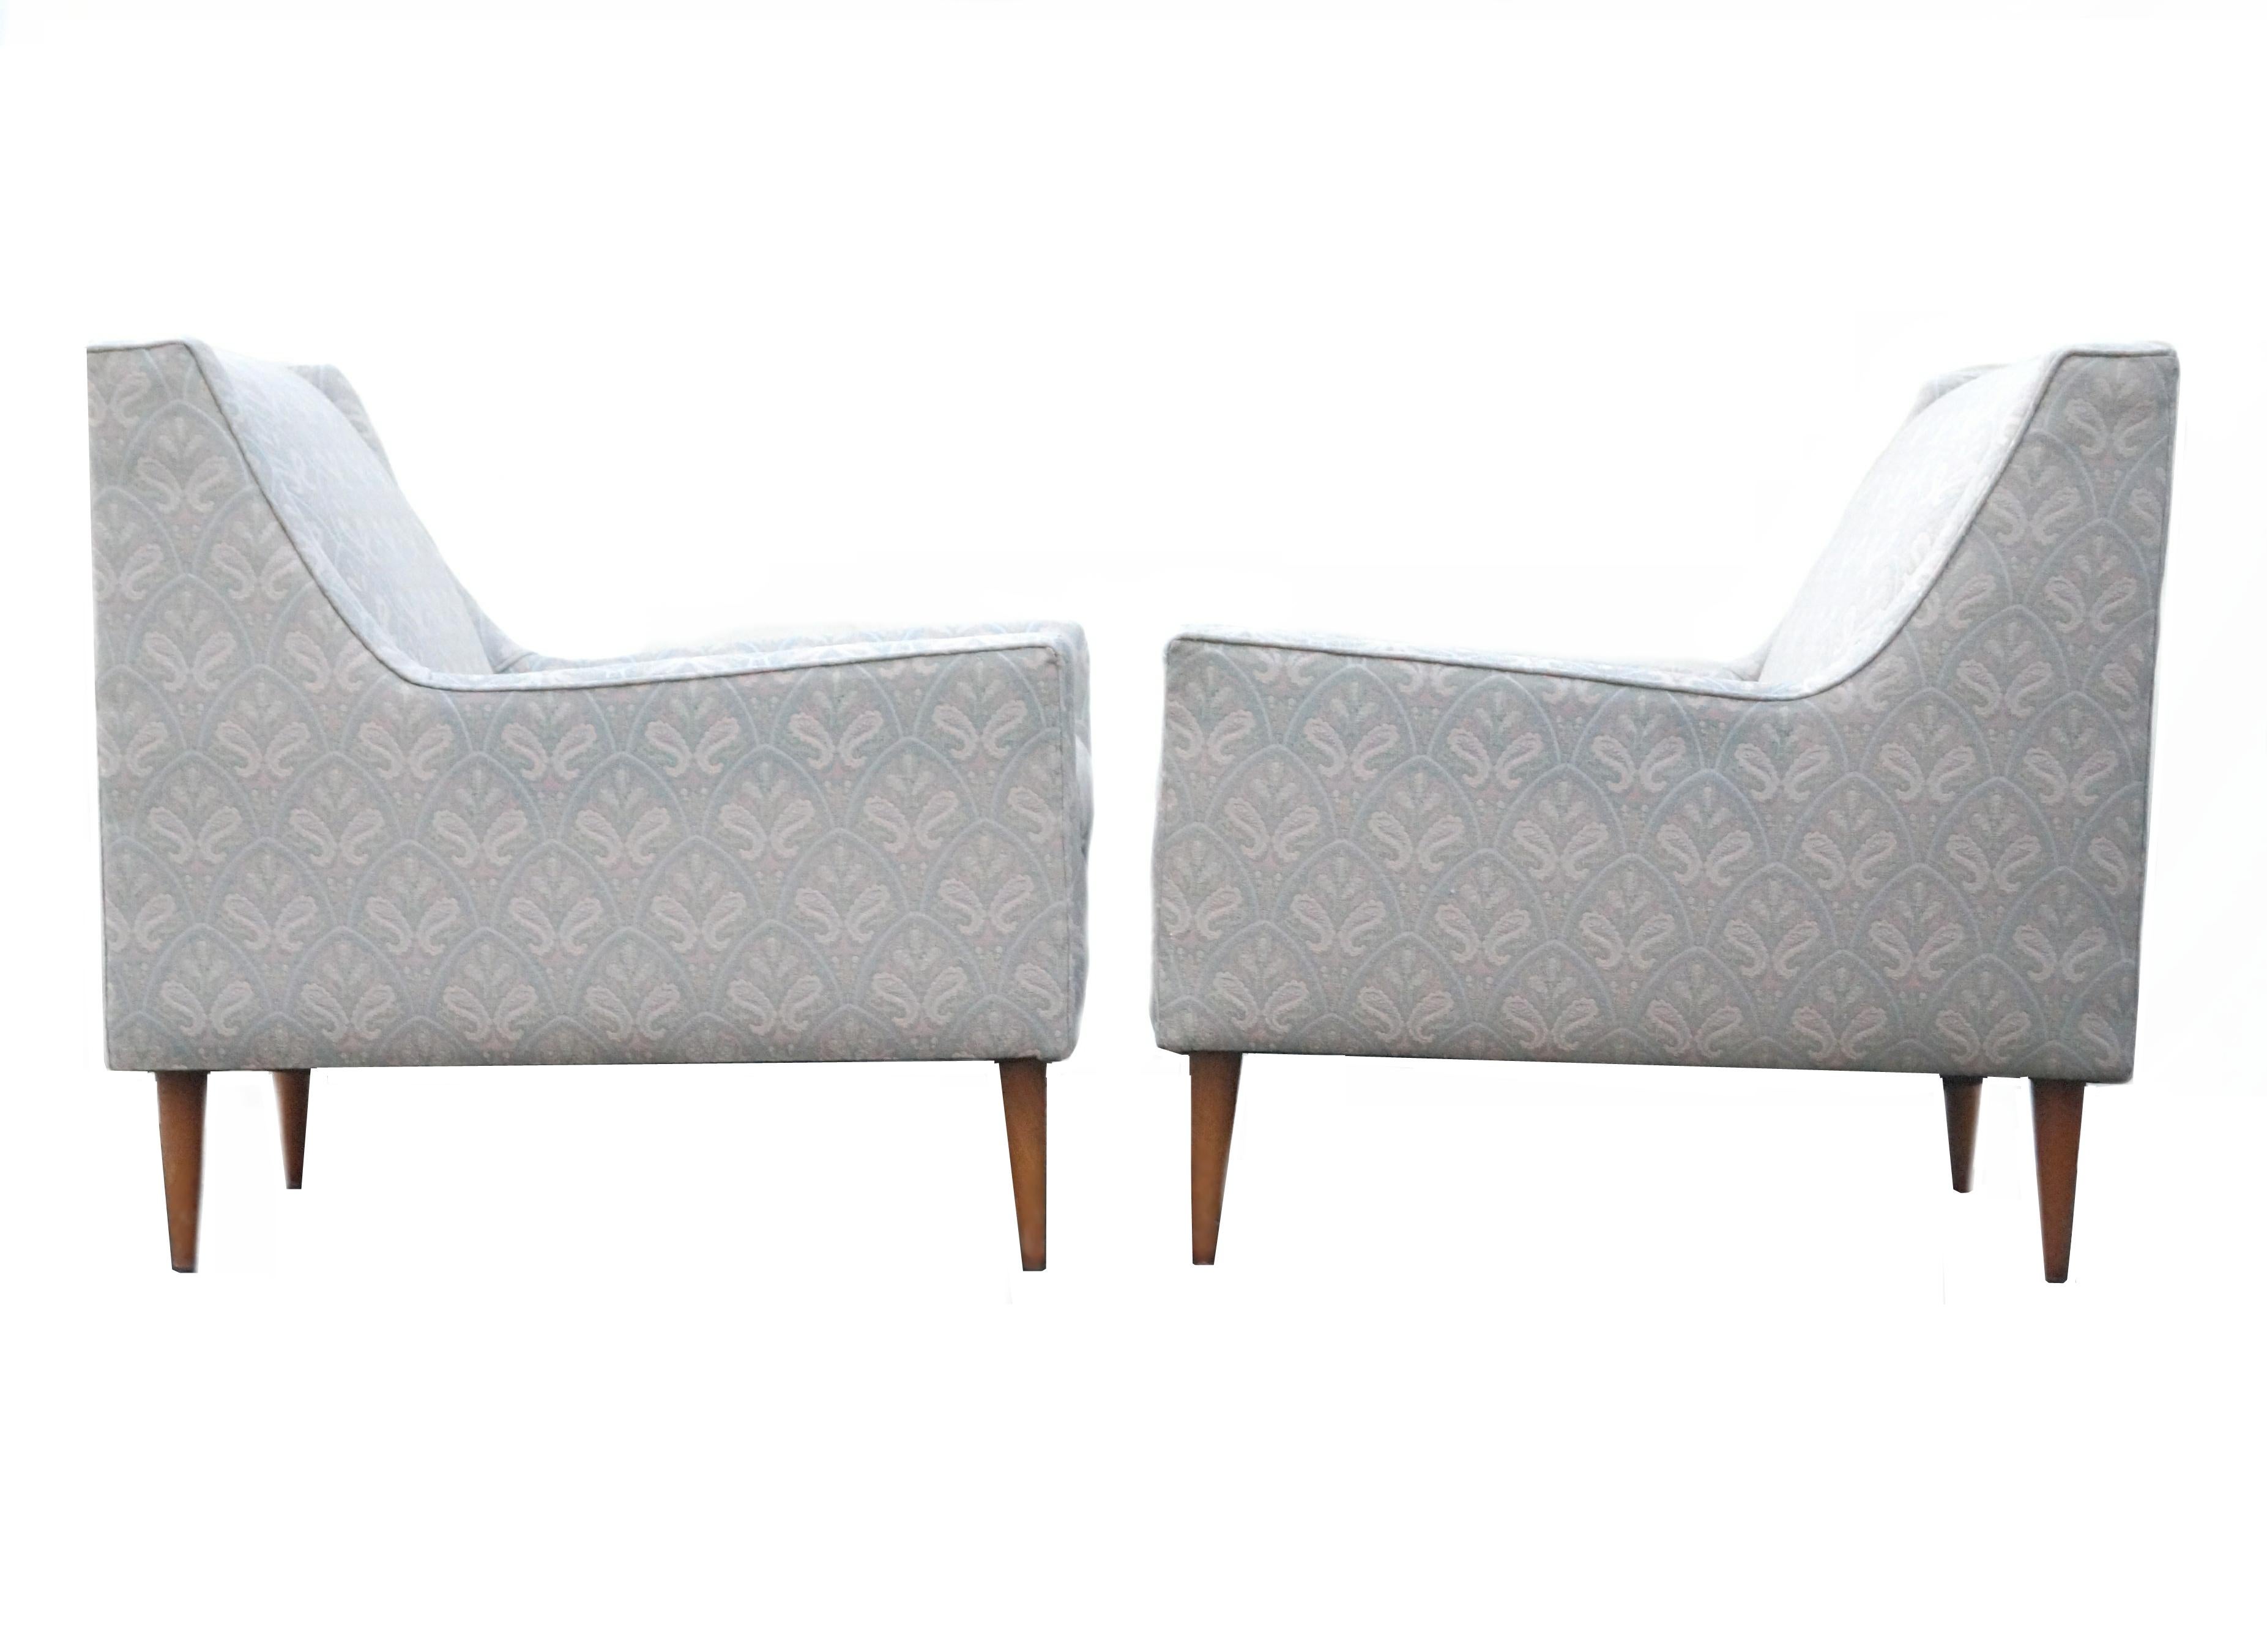 Mid-20th Century Pair of Aerodynamic 1950's Mid-Century Modern Club Chairs Edward Wormley Style For Sale